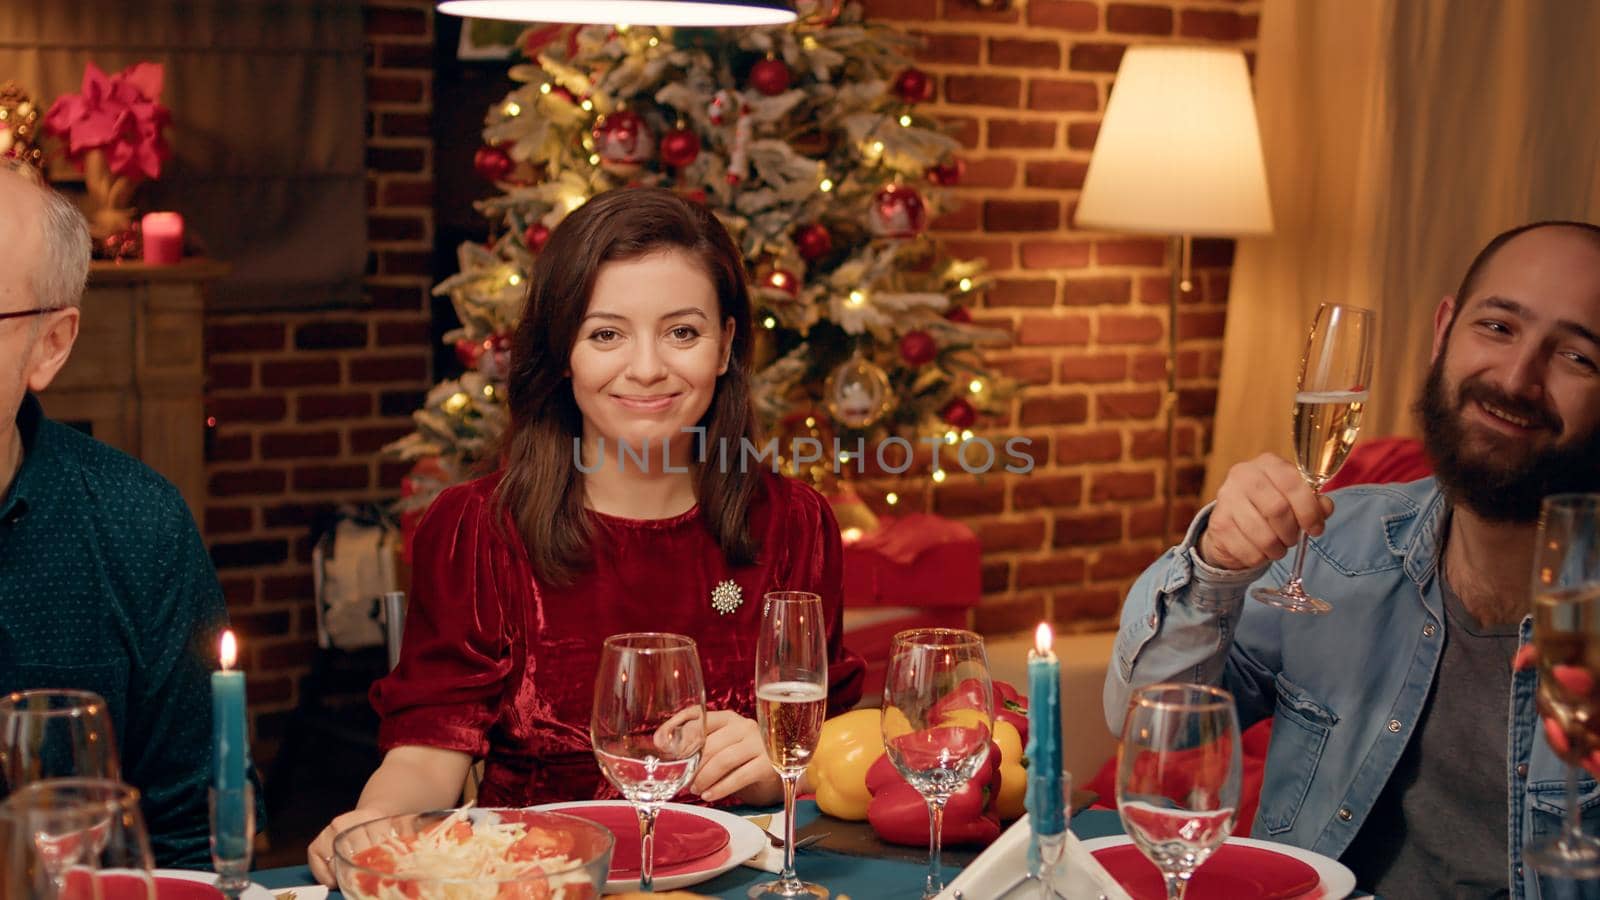 Gorgeous woman smiling heartily at camera while enjoying winter holidays with close family members. Festive wife talking with husband while celebrating Christmas at evening dinner family table.